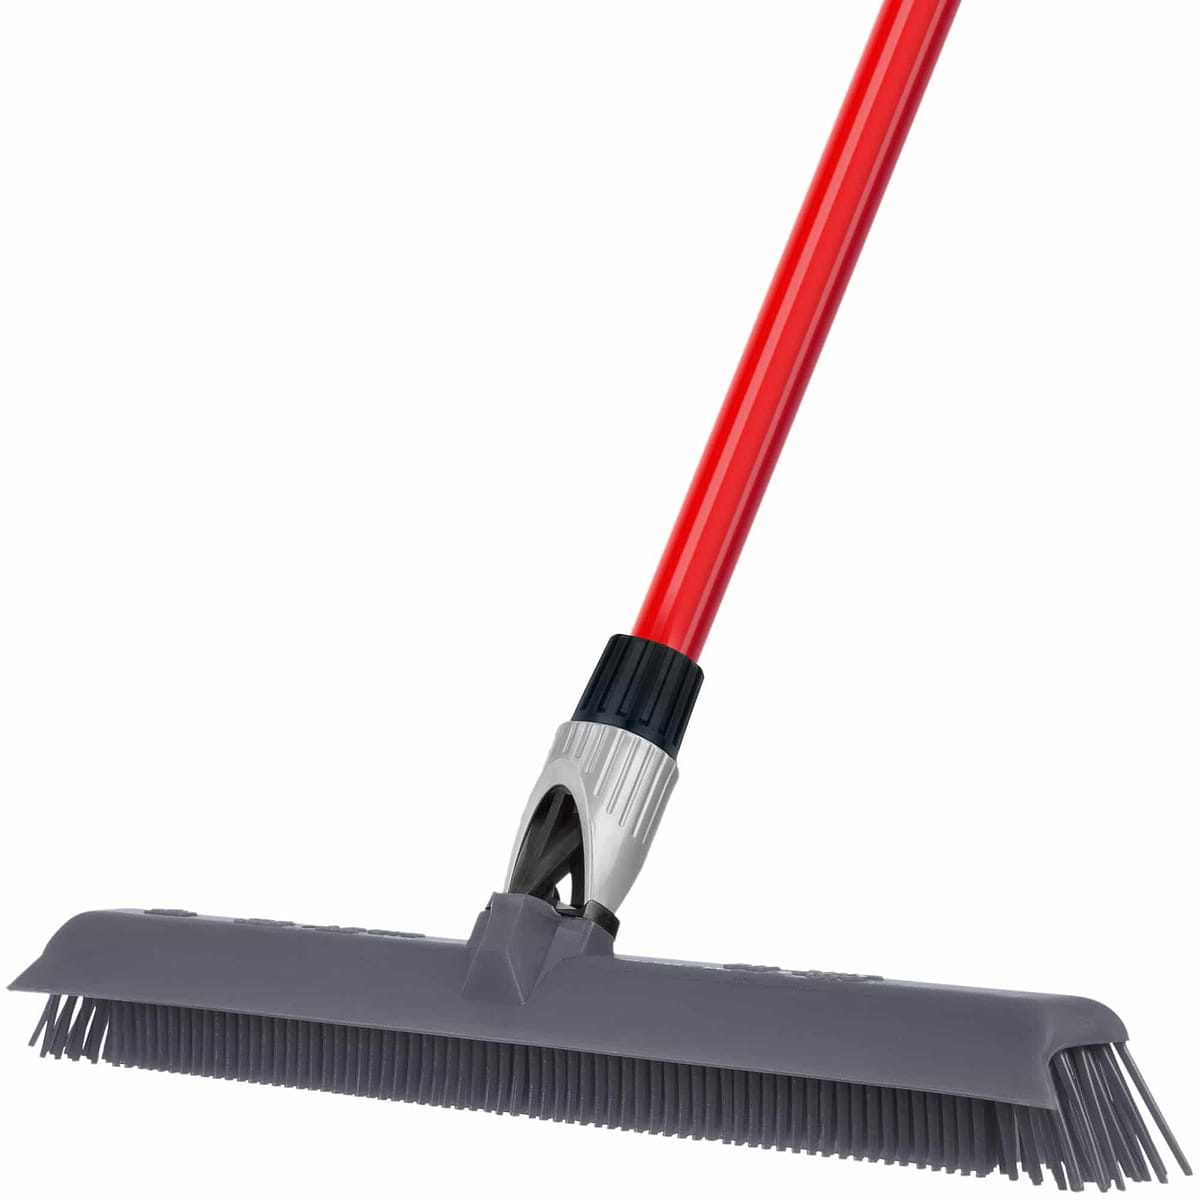 An Inventory of Cleaning Tools, Brushes, Brooms & Bristles